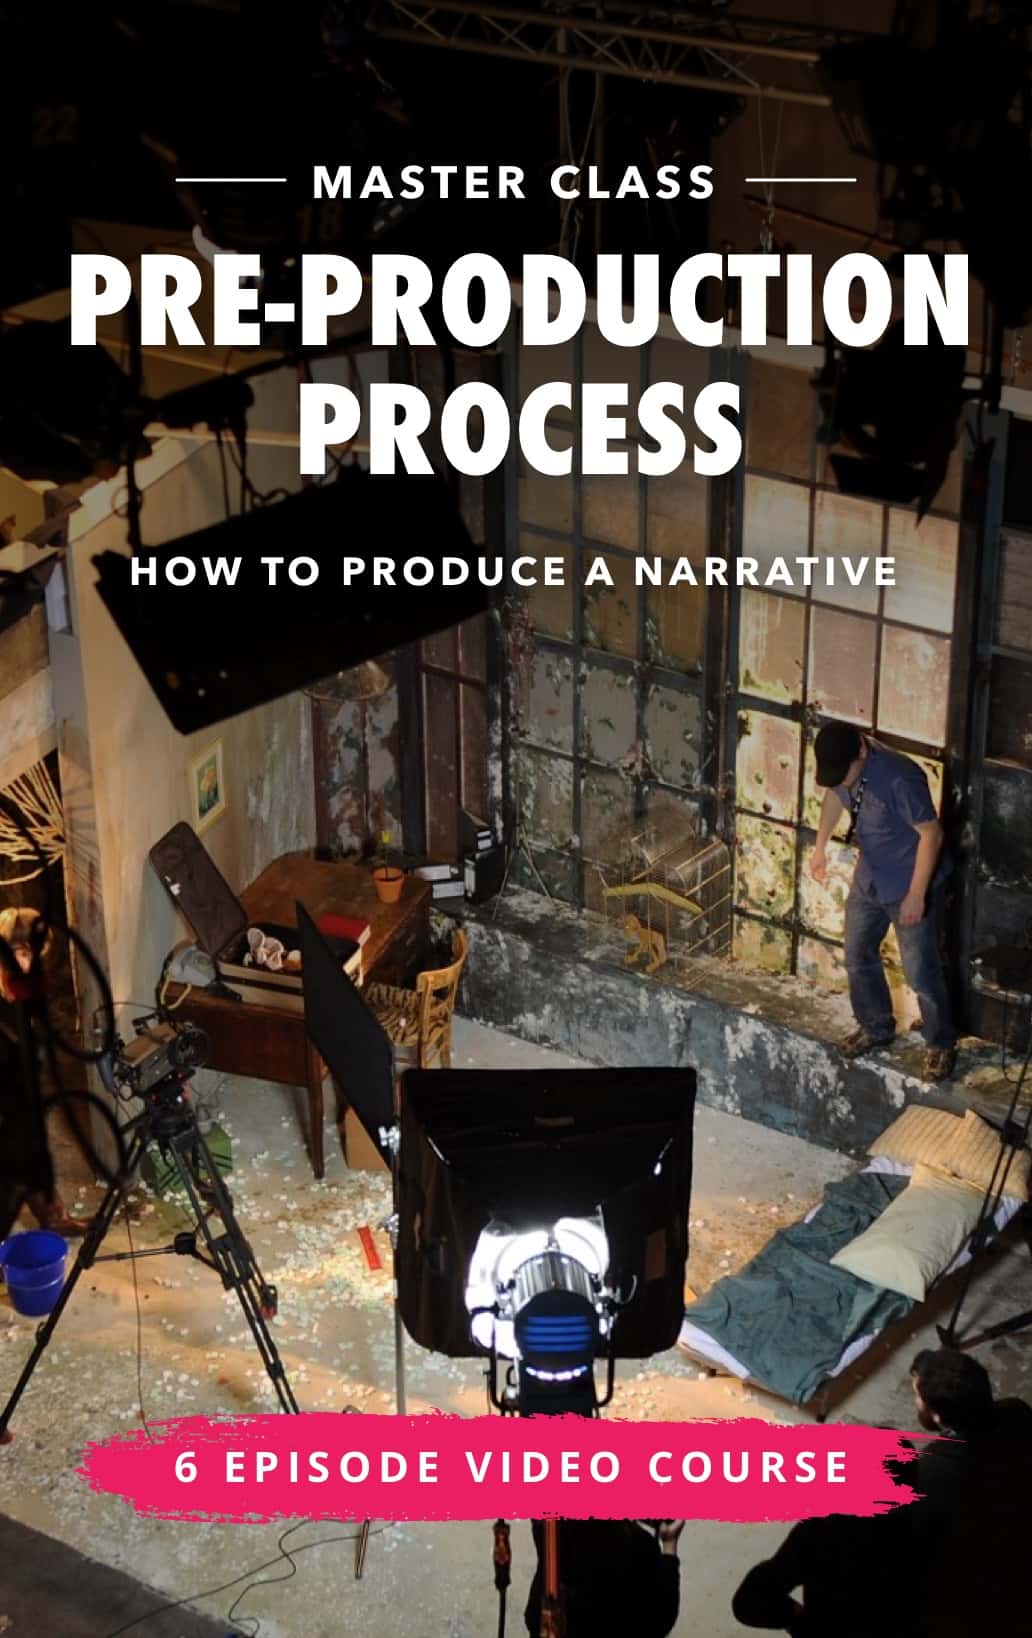 Producing E-Course - The Pre Production Process Explained - StudioBinder